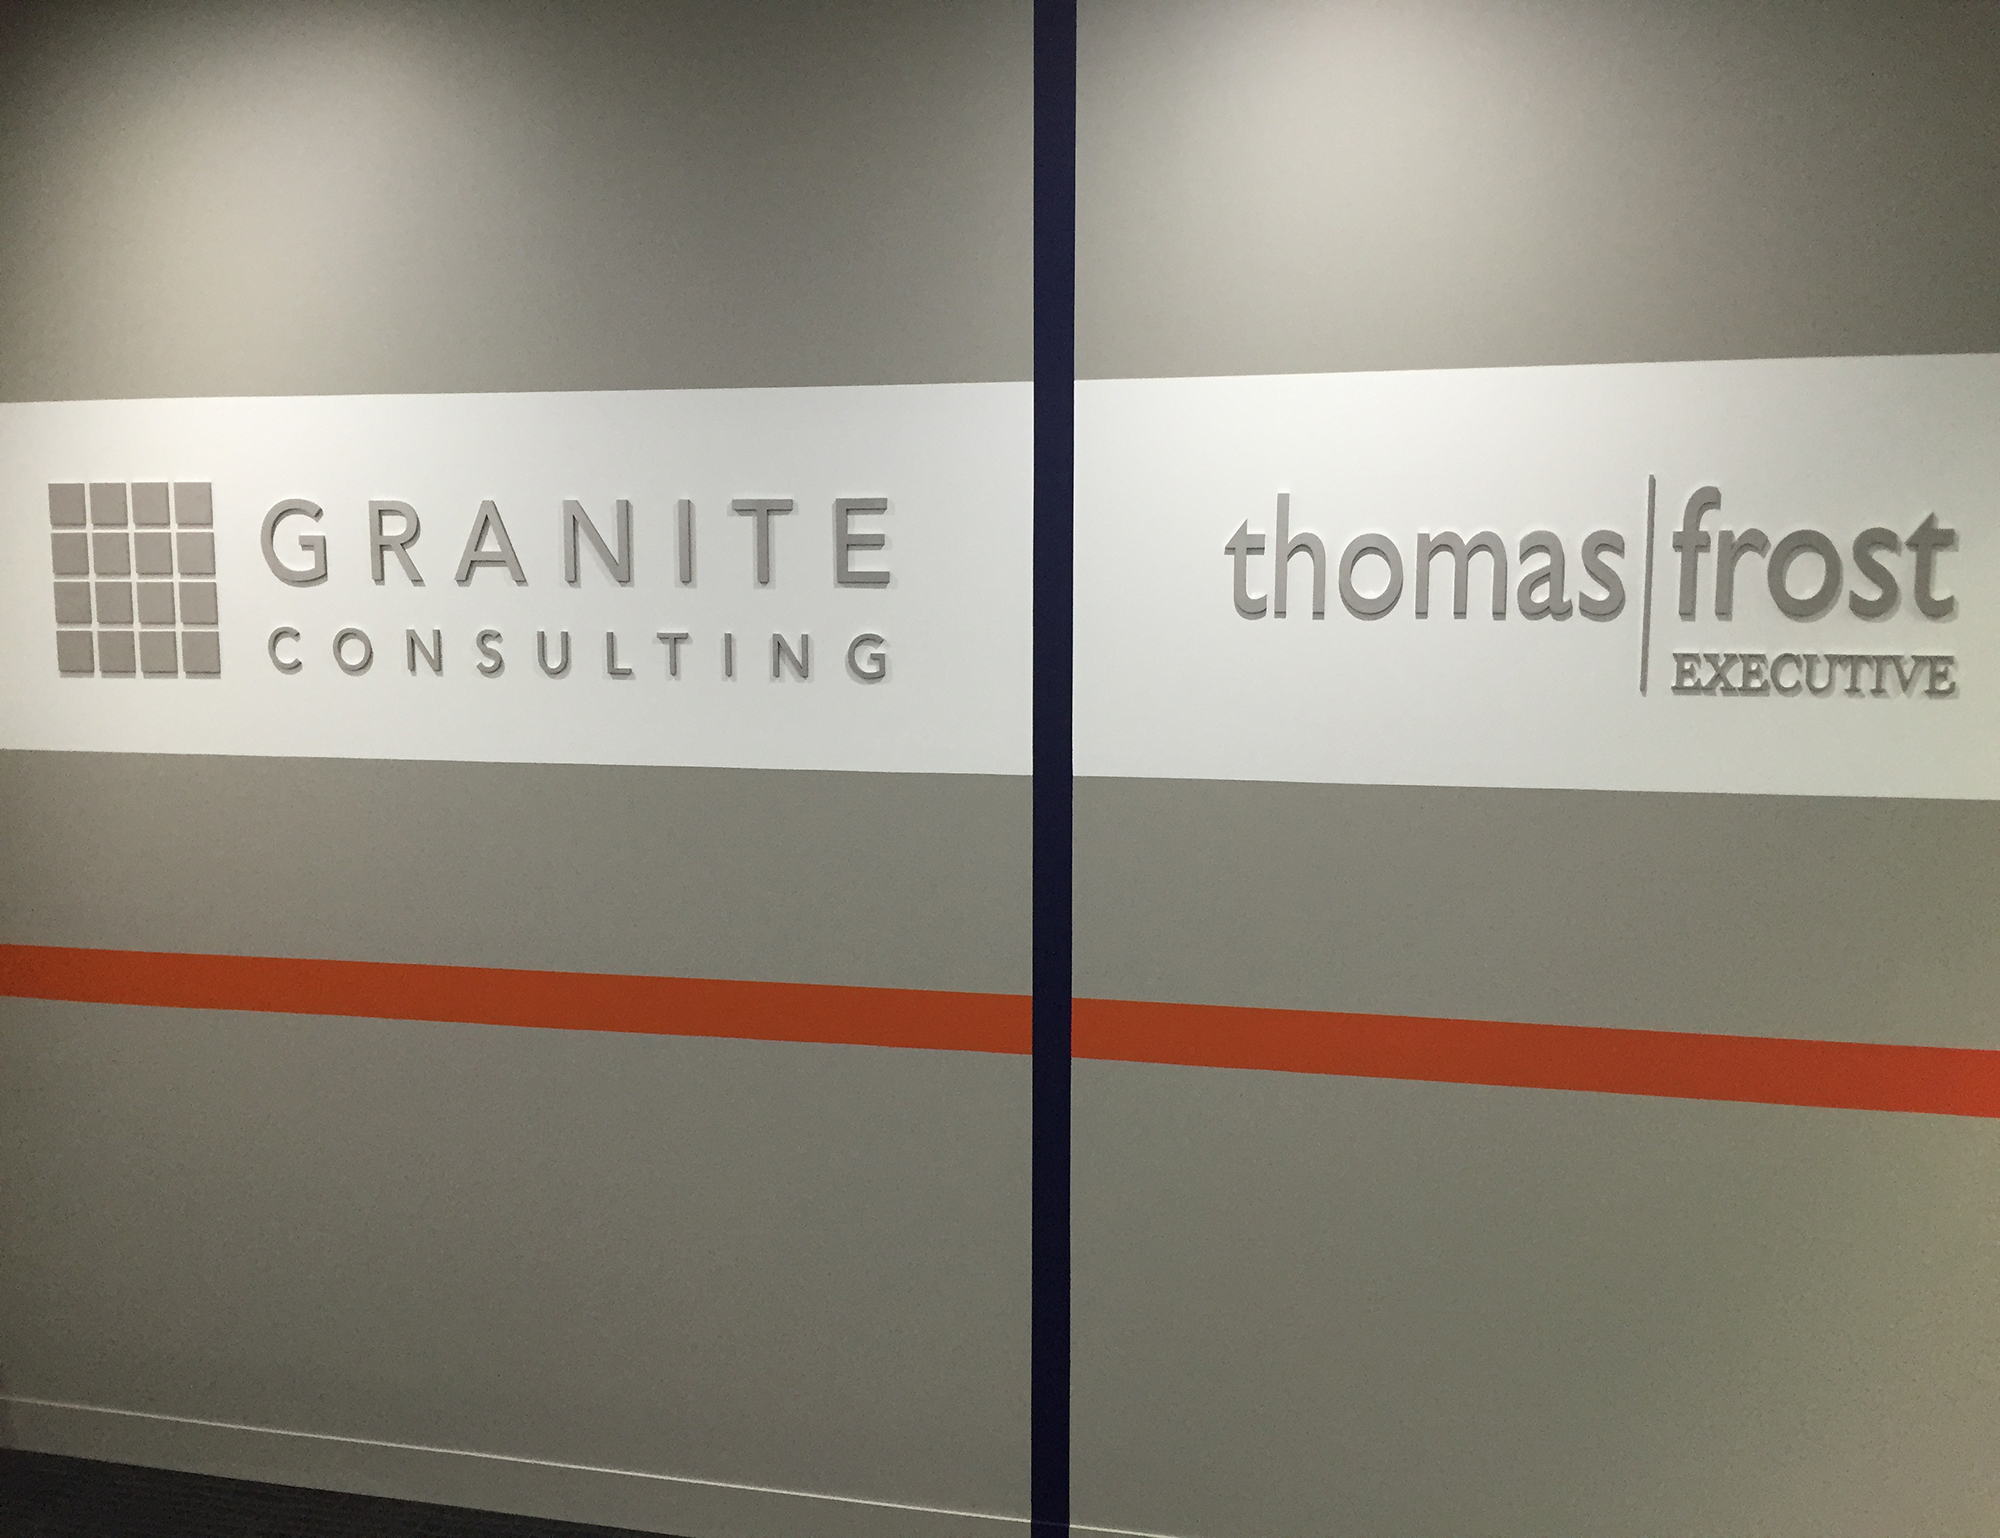 Thomas-Frost-_-Granite-Consulting-painted-acrylic-logos